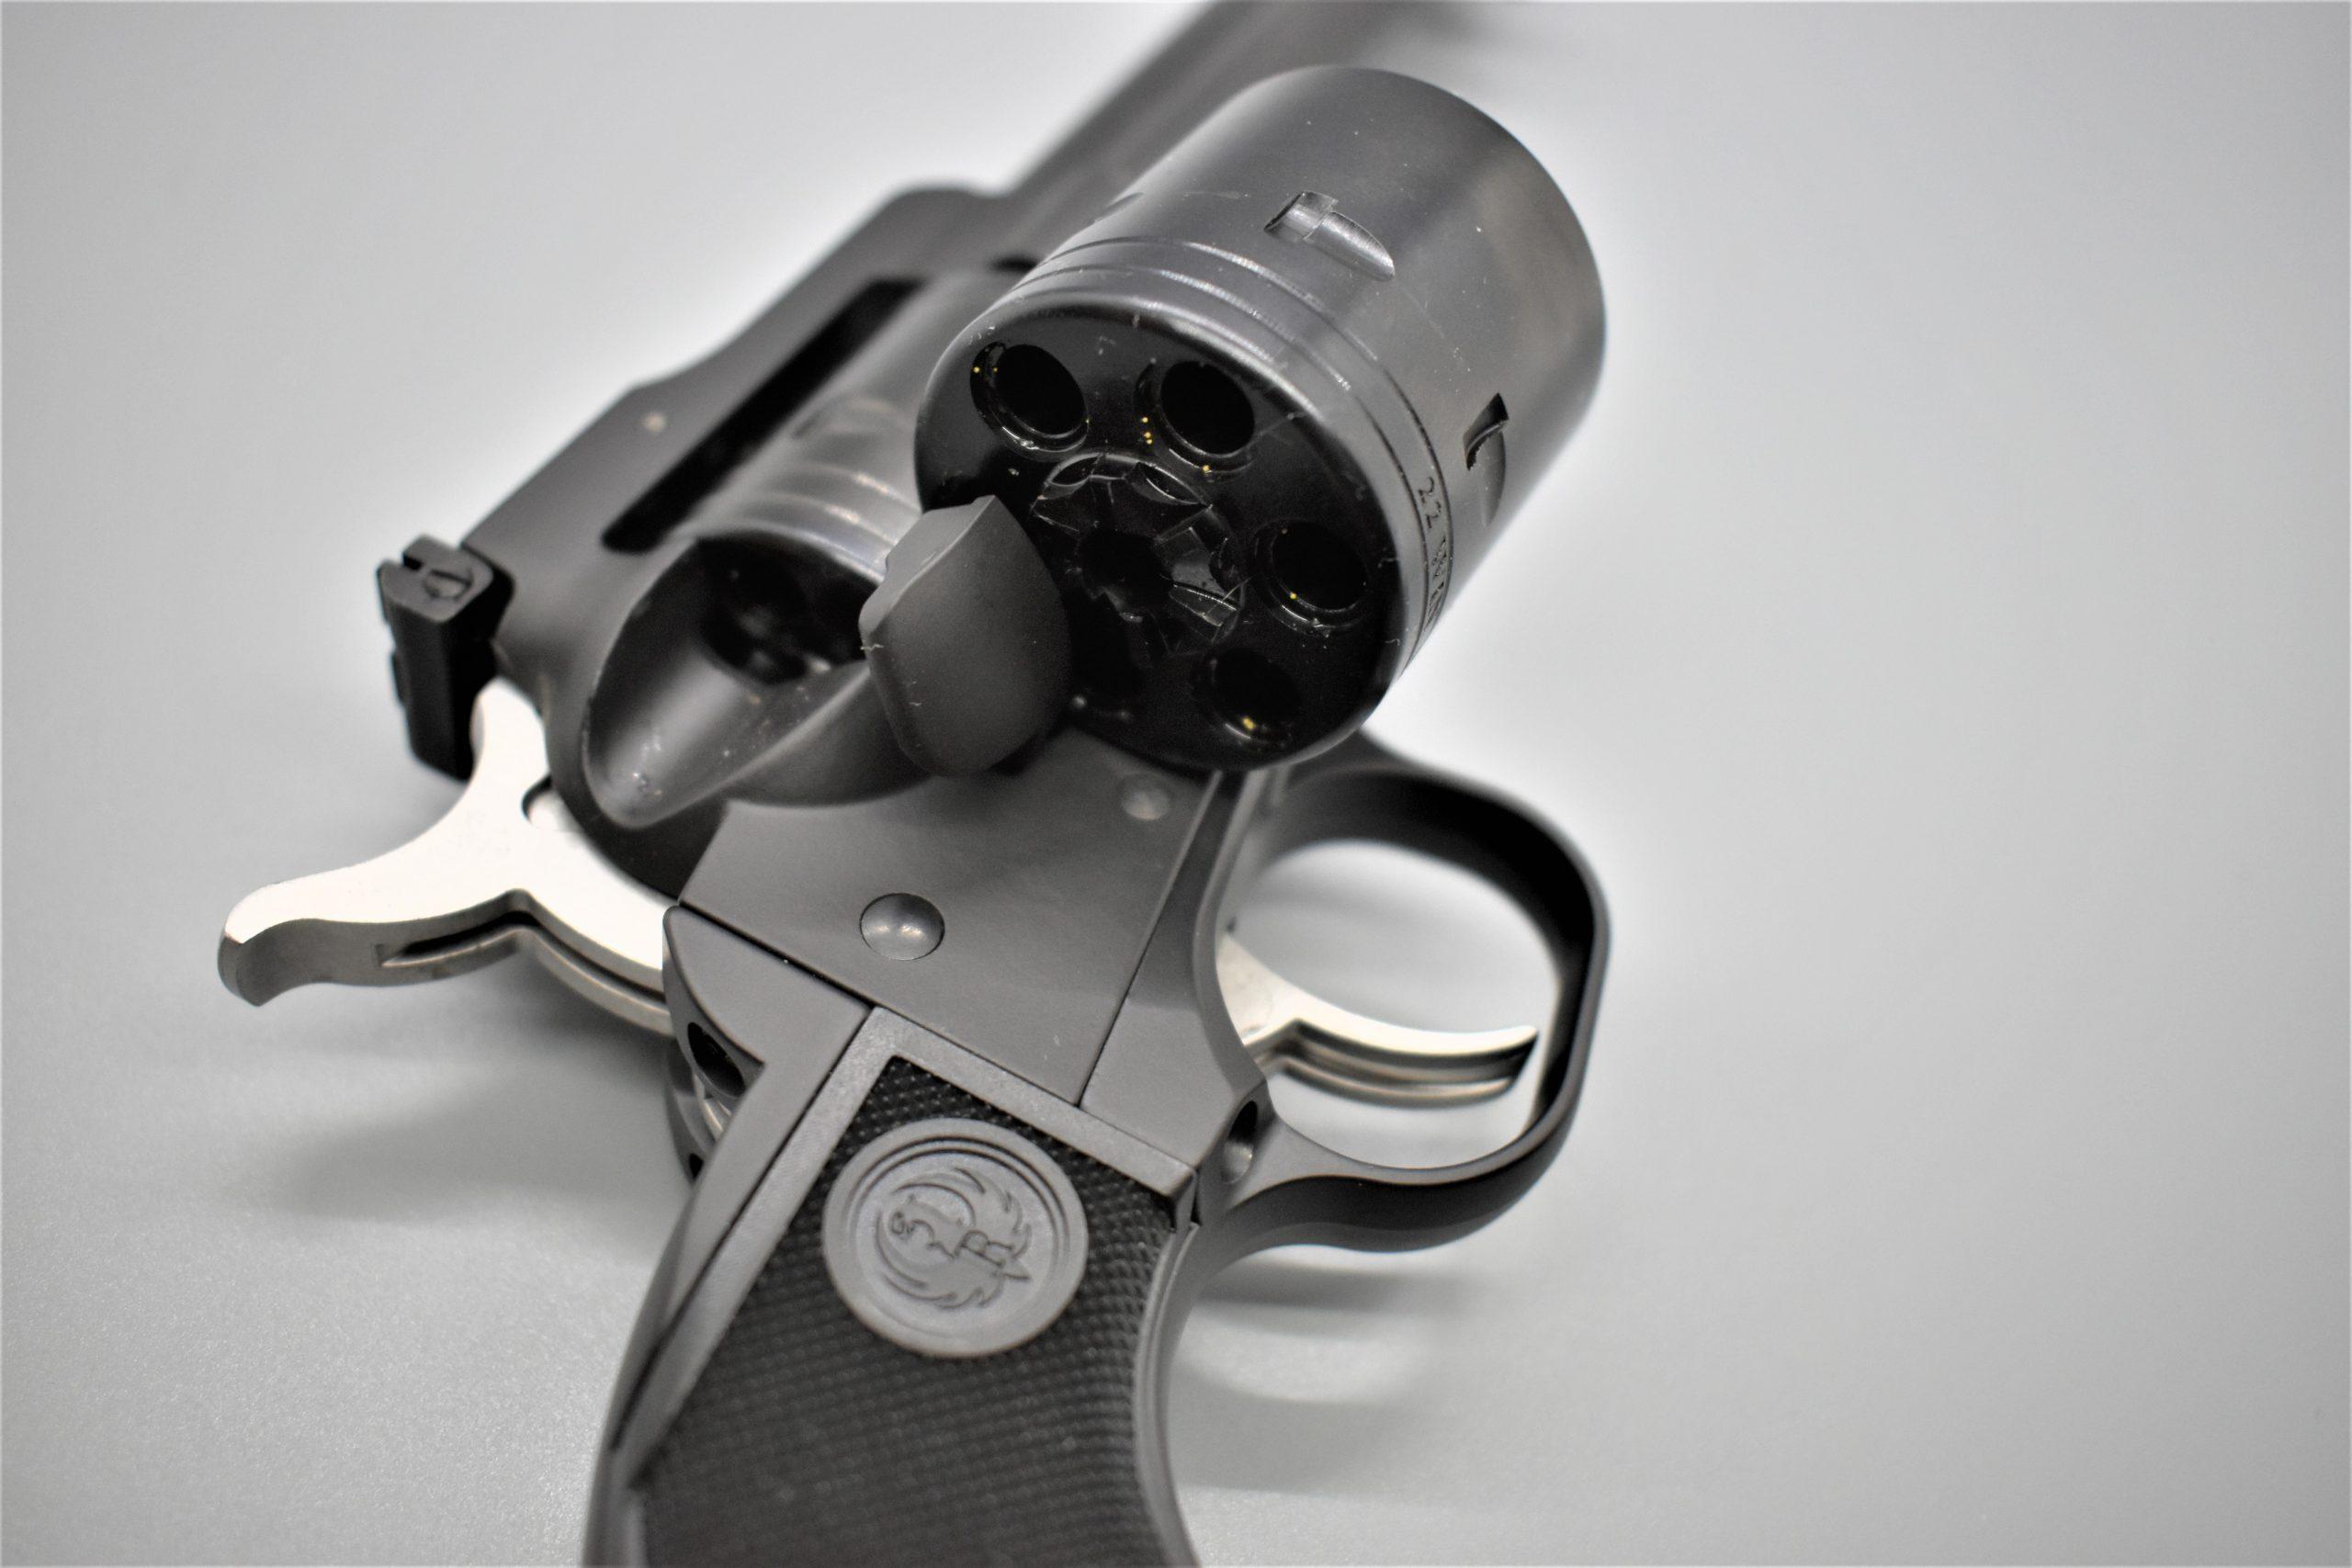 New Ruger Super Wrangler 22 Magnum Convertible | American Firearms